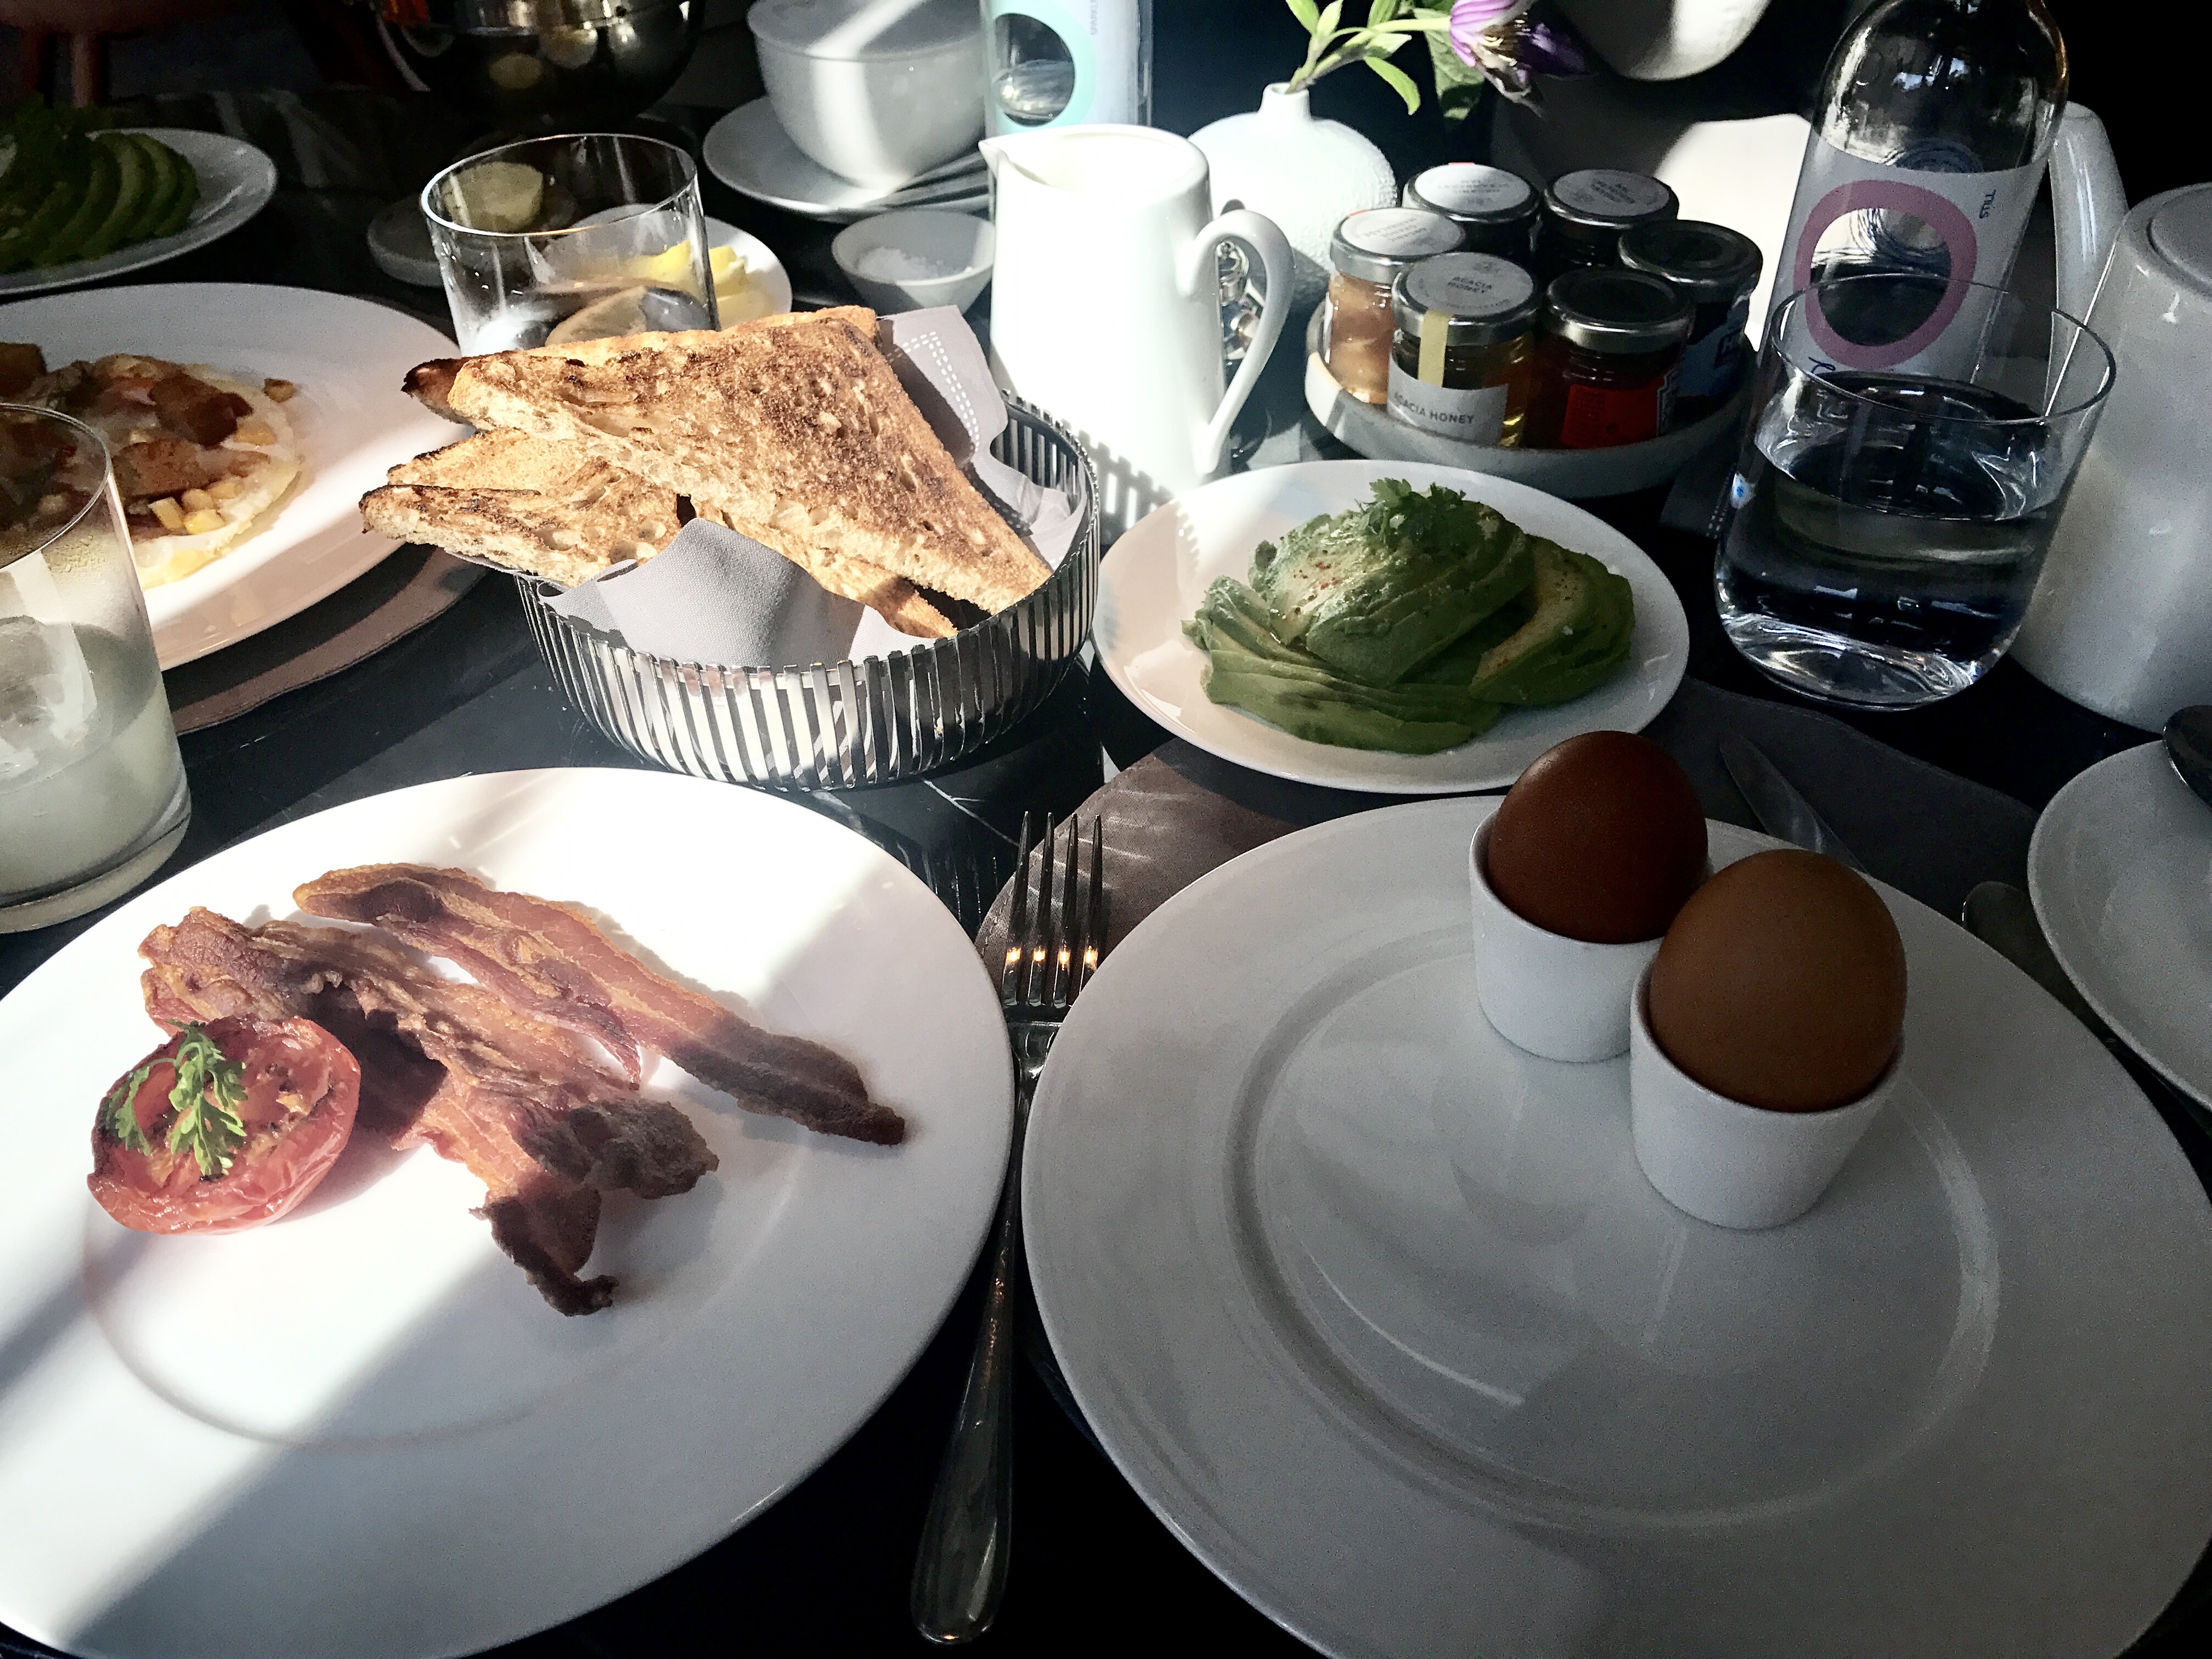 Breakfast at The Connaught hotel Jean Georges restaurant